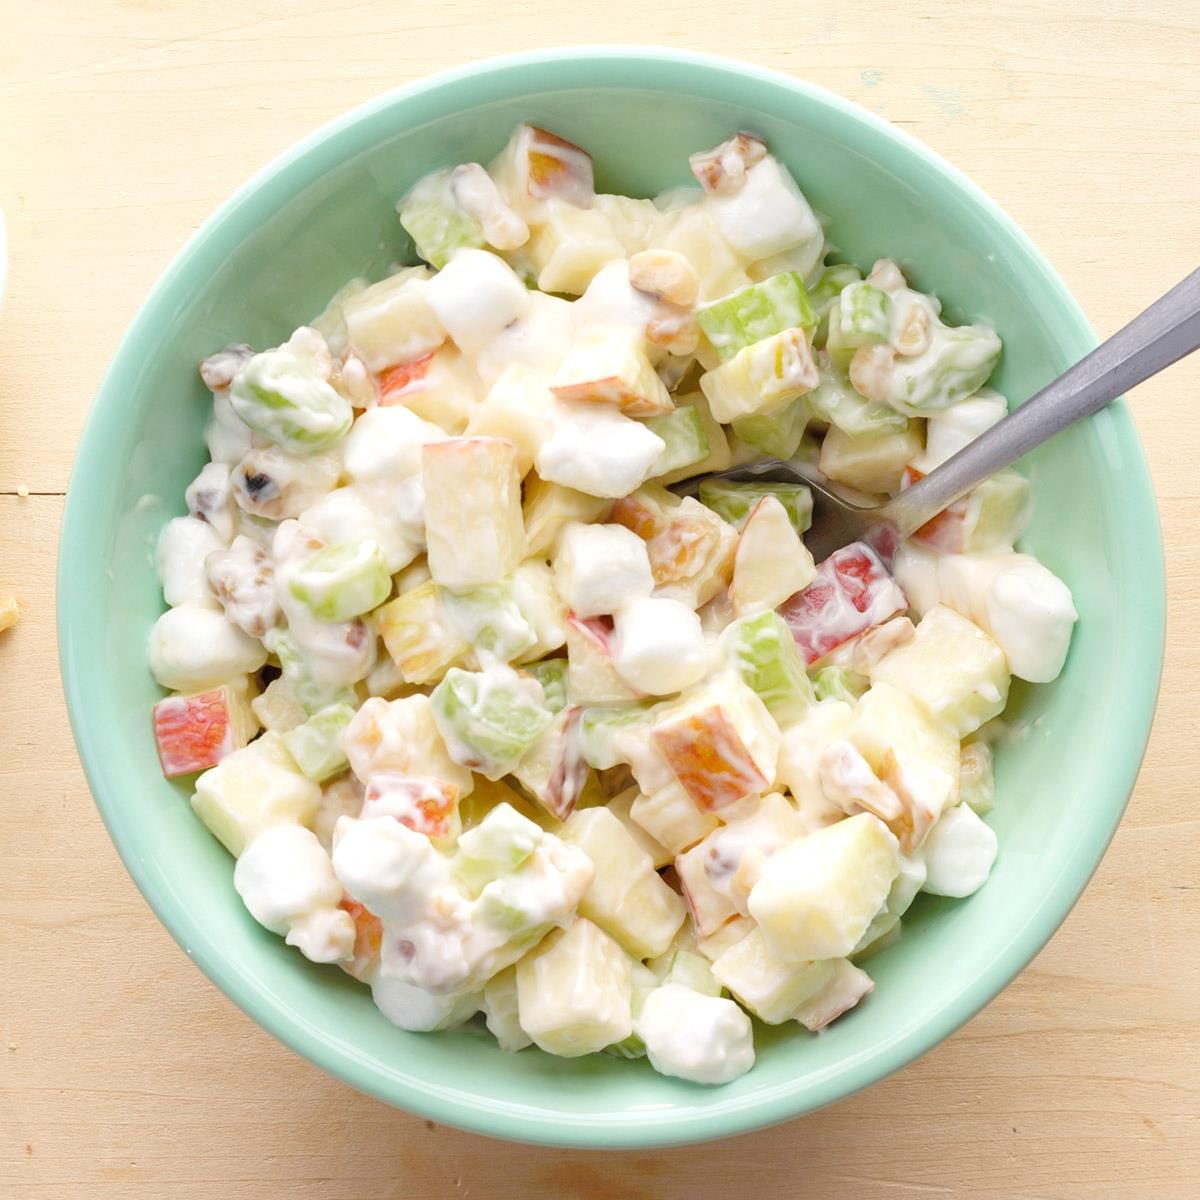 Delicious Apple Salad Recipe: How to Make It